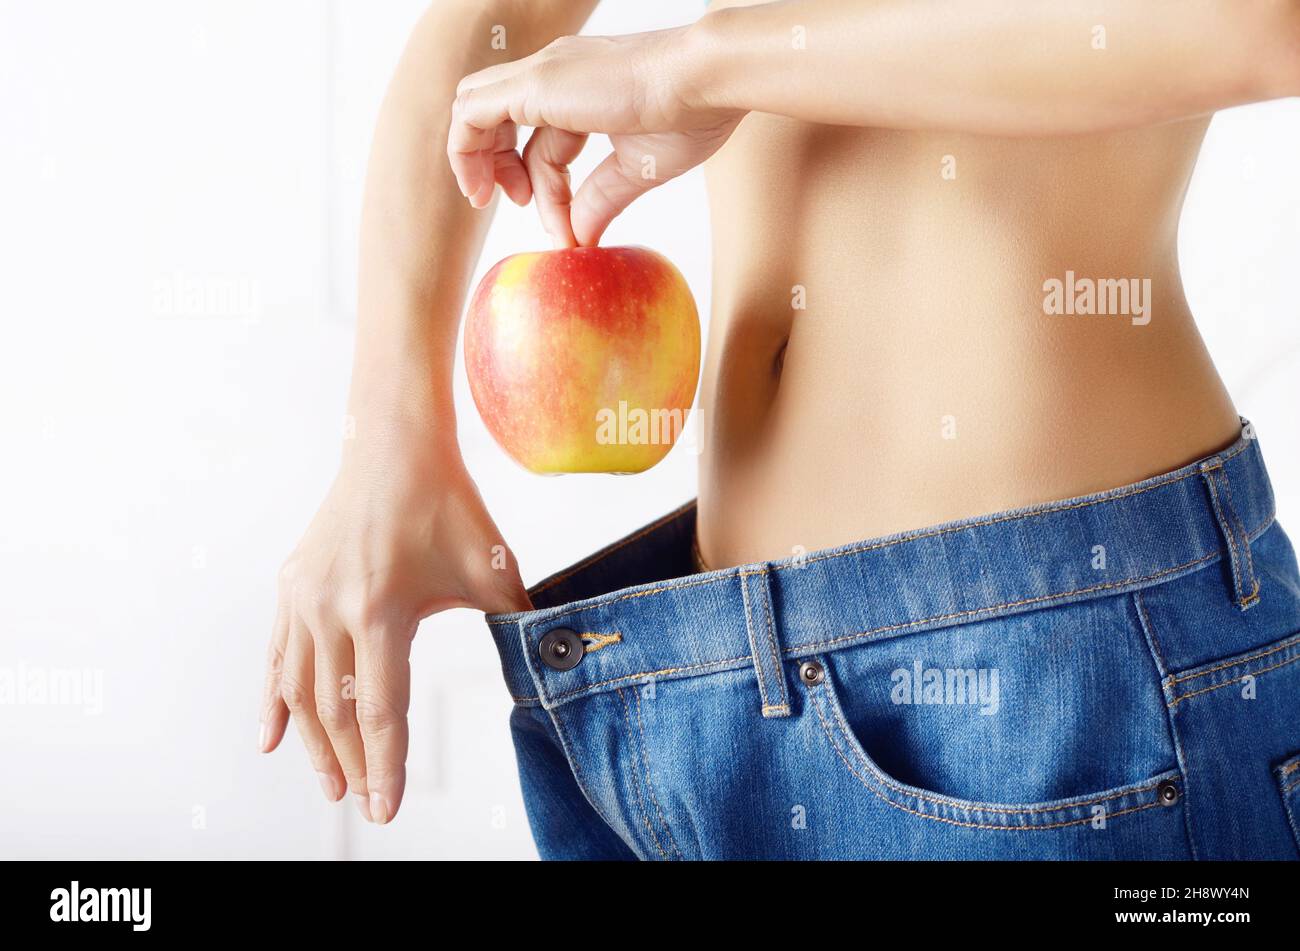 Caucasian female model in blue jeans with red apple showing her flat stomach. Healthy lifestyle and Weightloss concept. Stock Photo